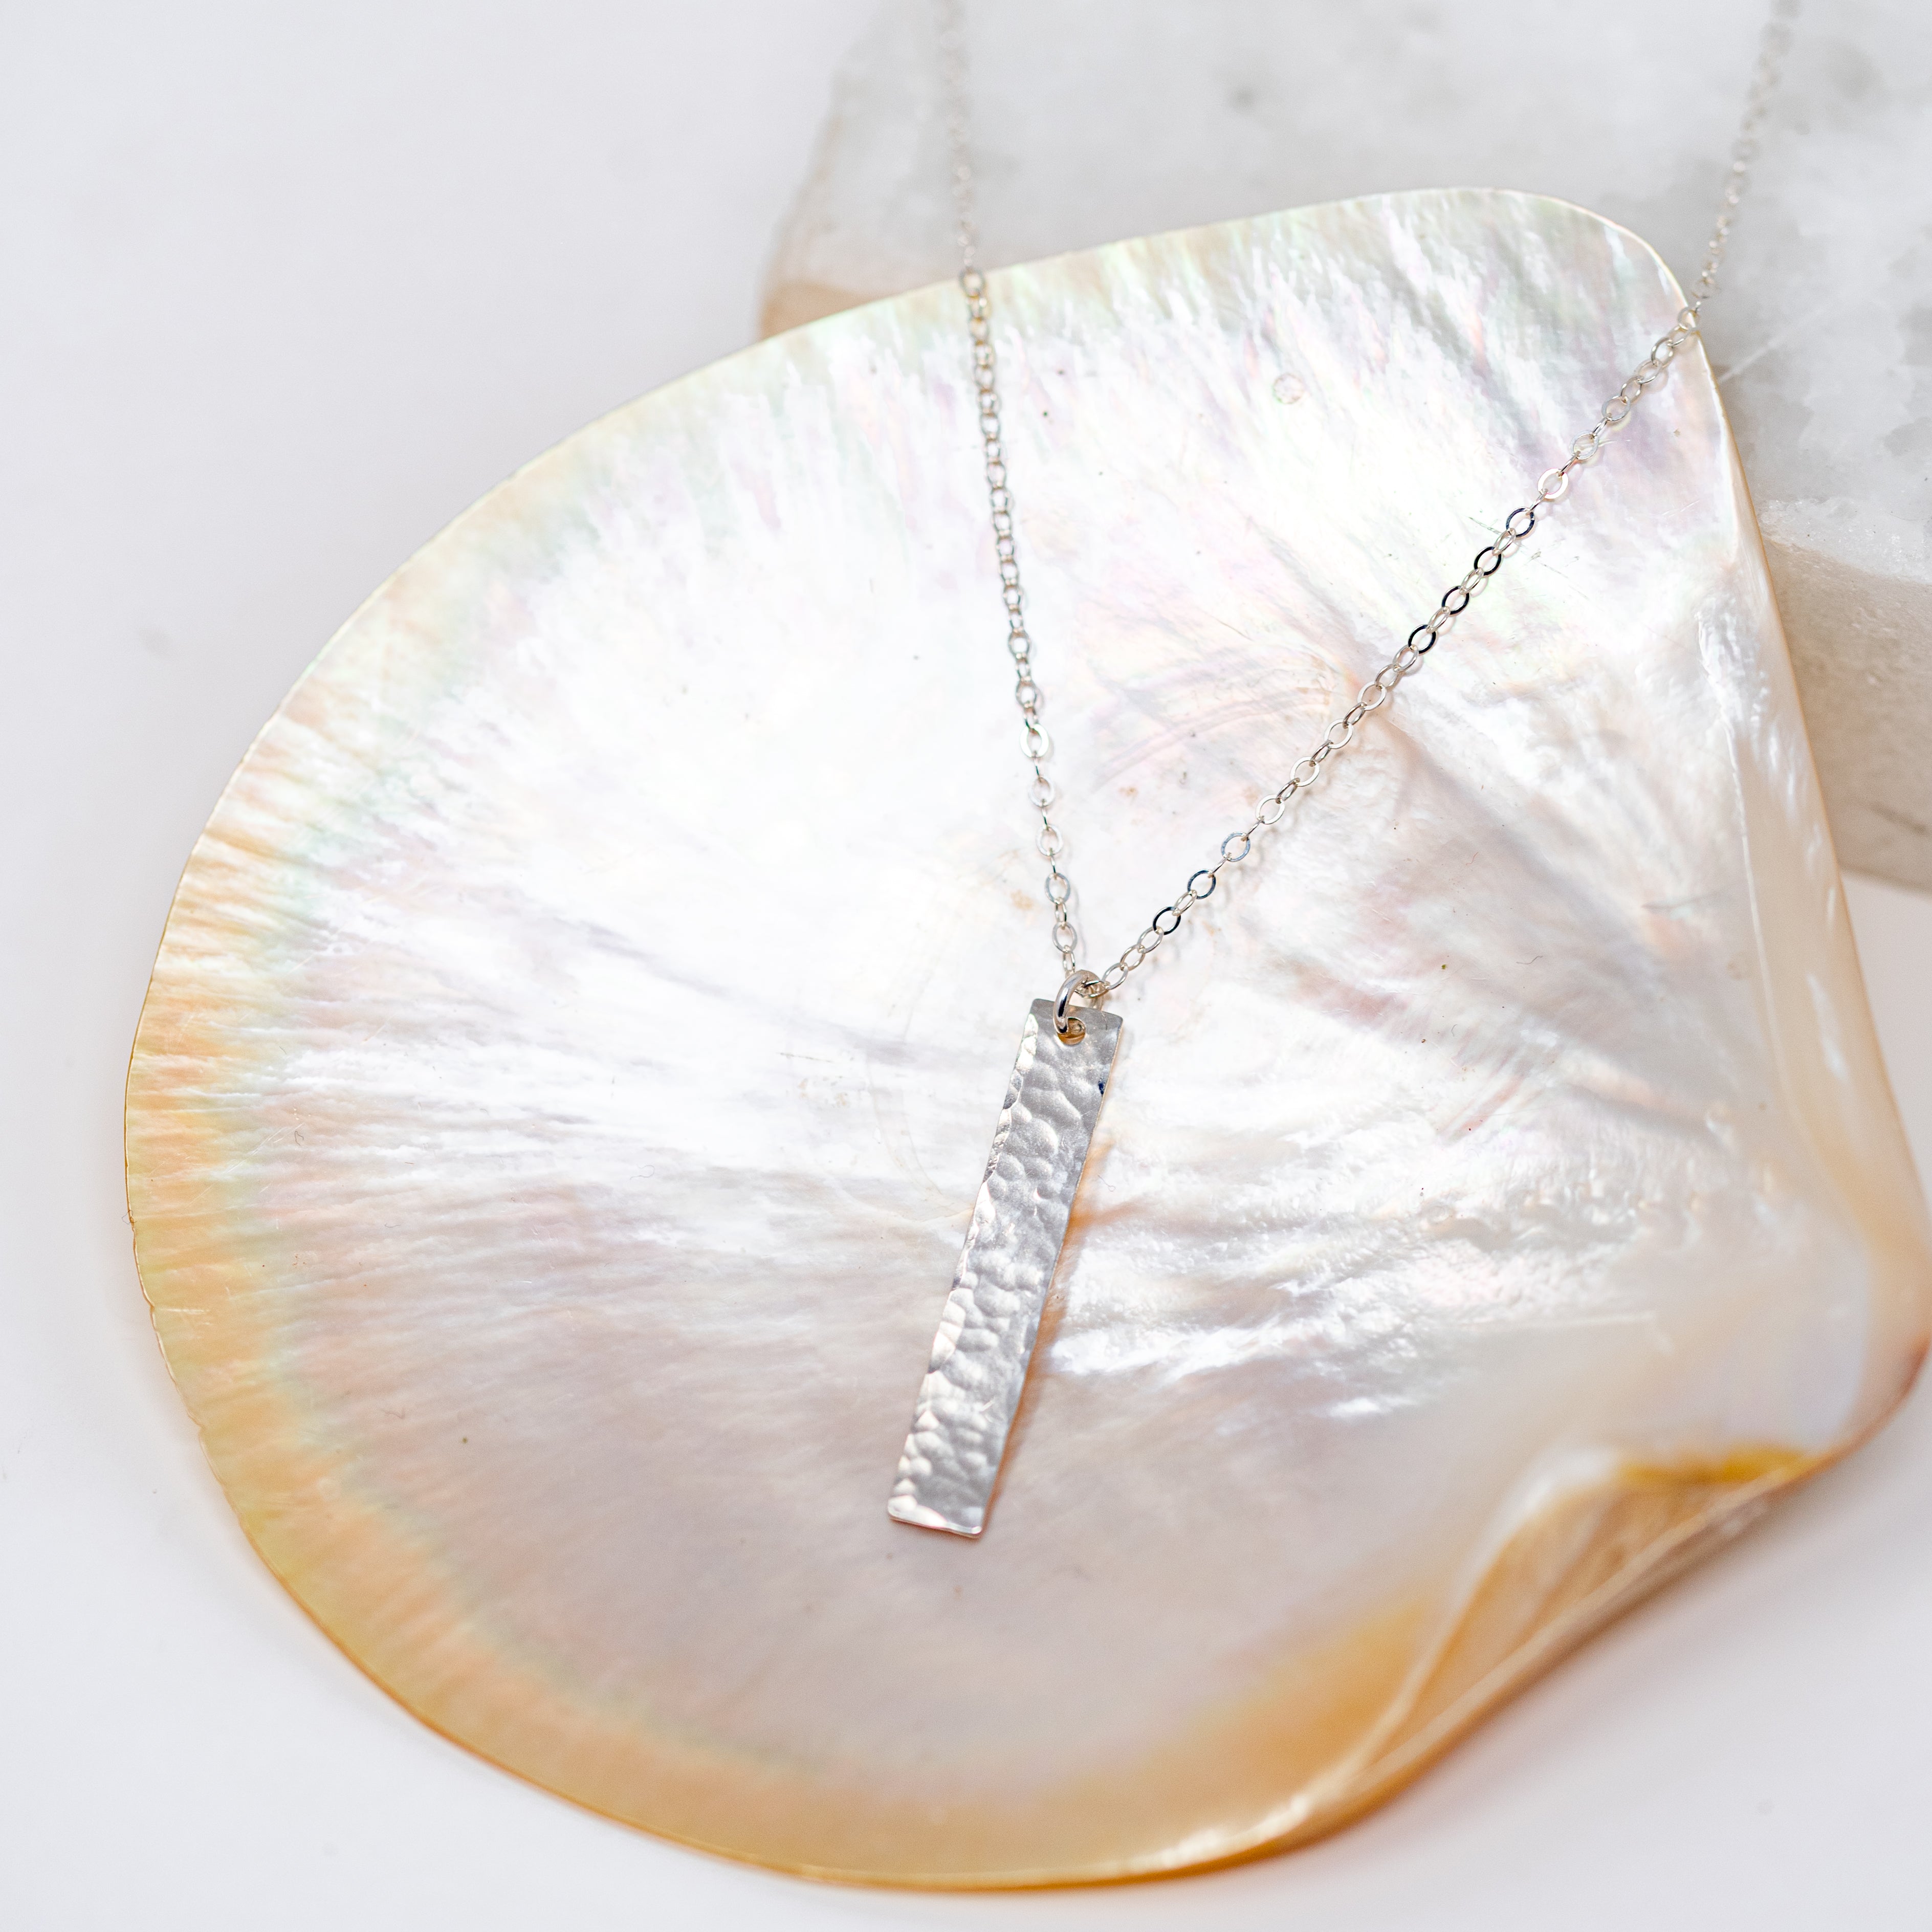 A silver vertical bar that is around an inch to an inch and a half. Attached to a silver chain and pictured in a shell. 